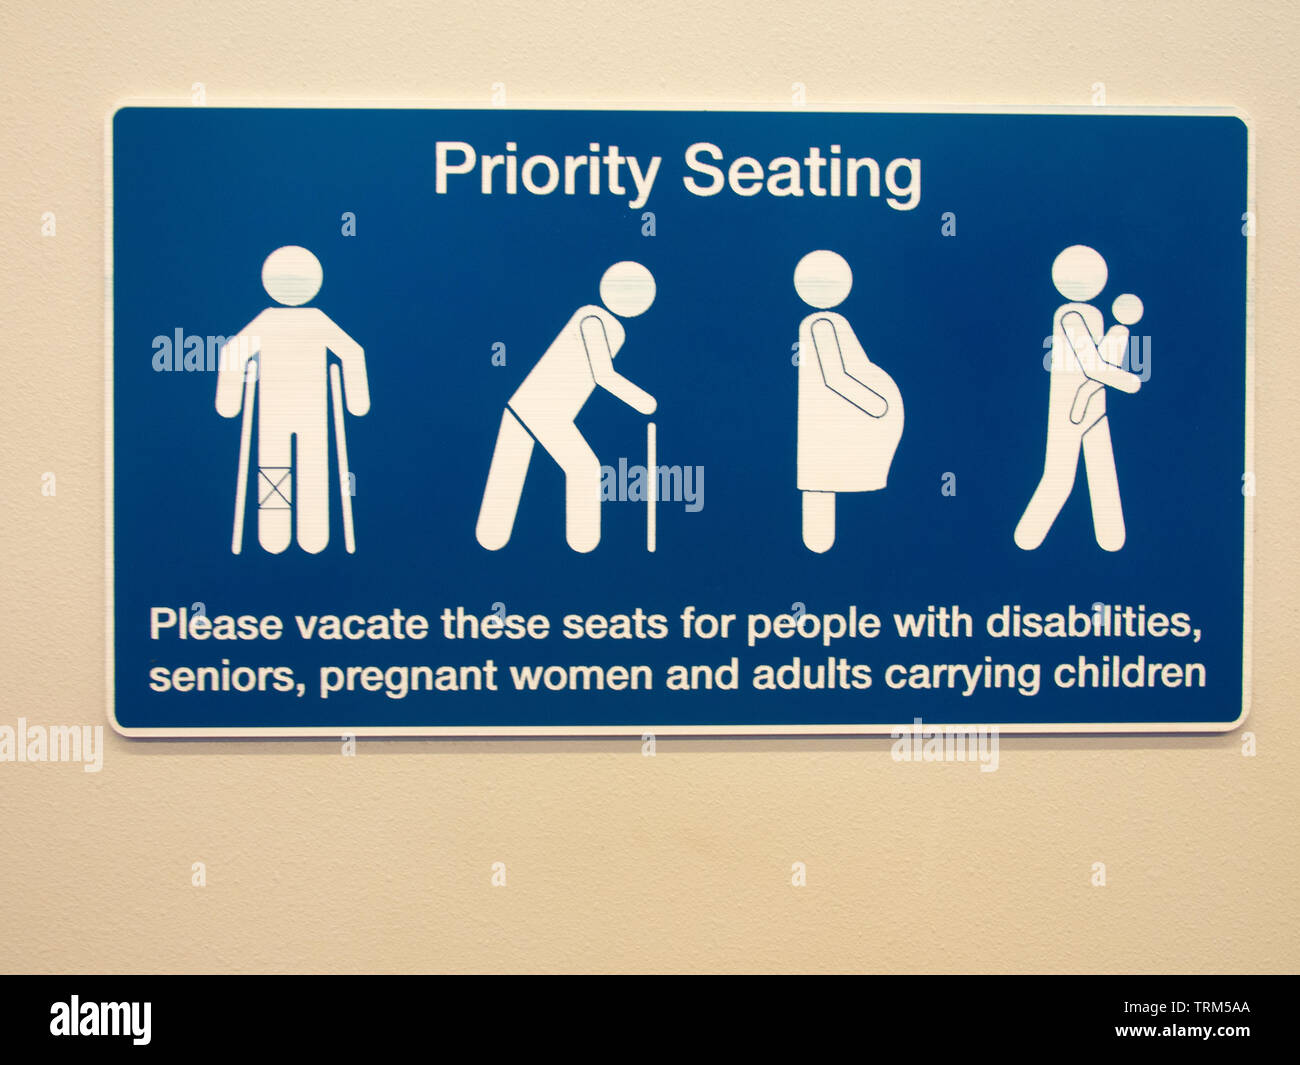 Priority Seating Information Sign On Public Transport Stock Photo